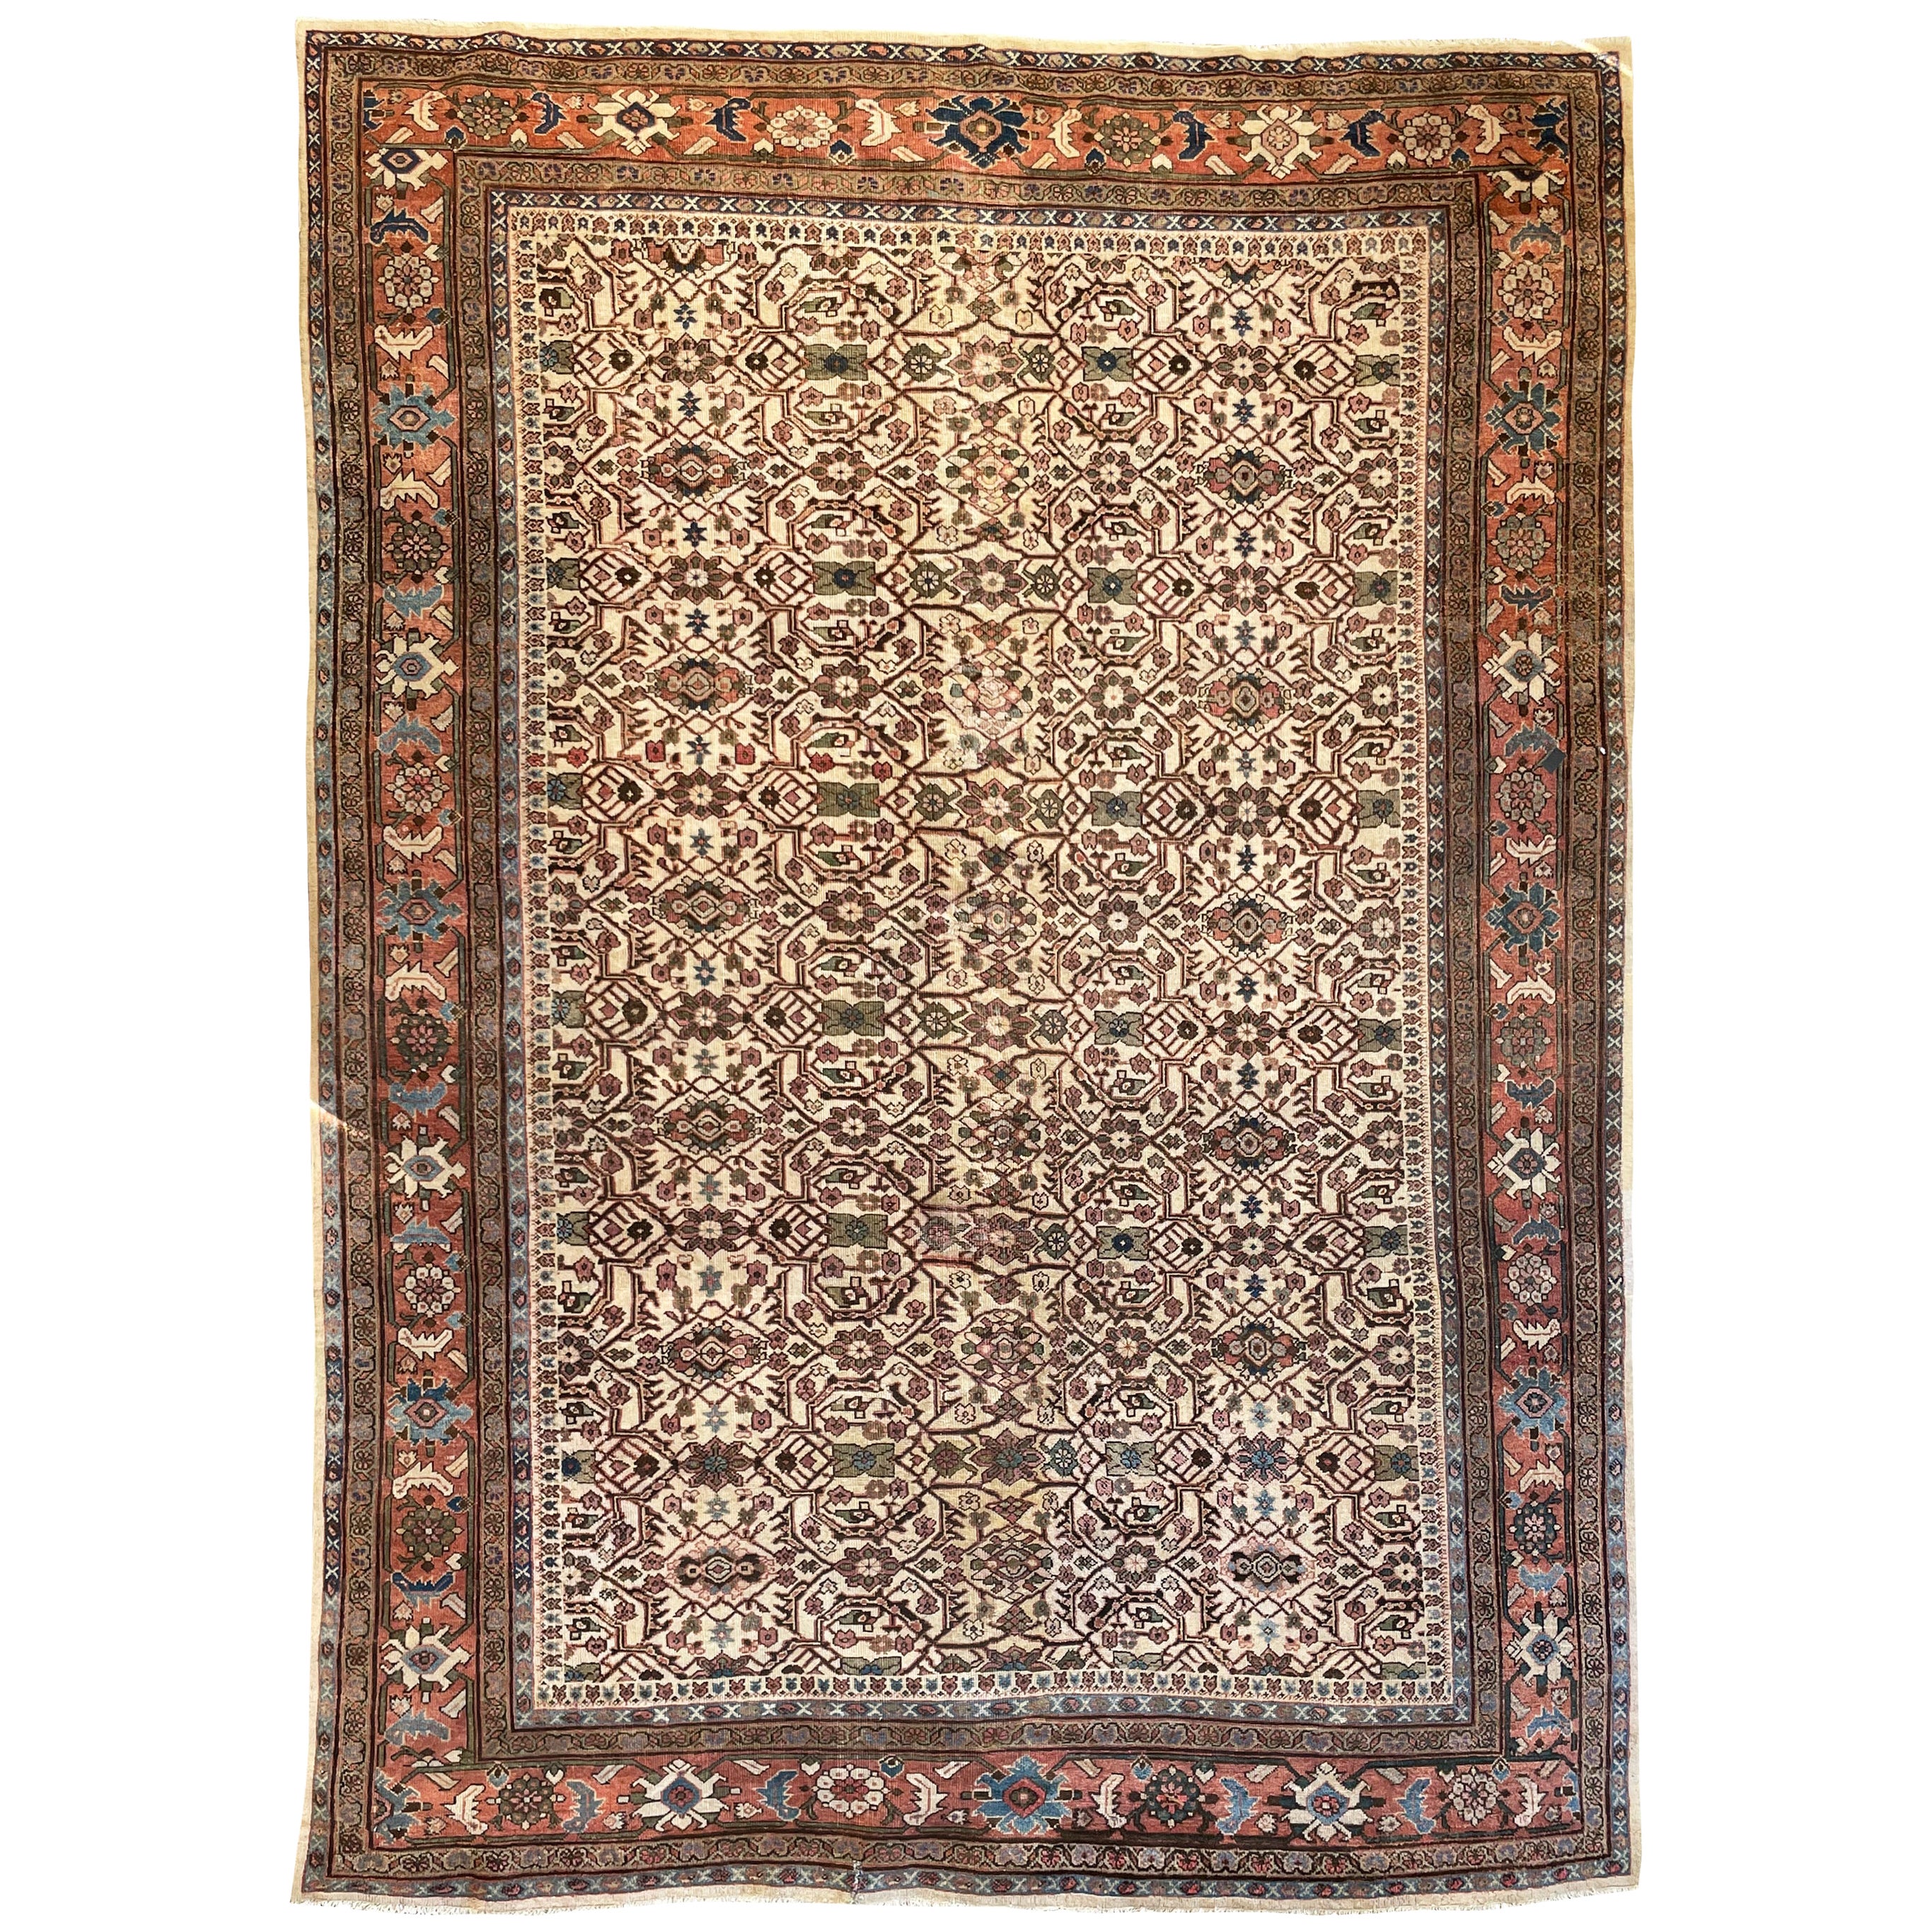 Fantastic Antique Beauty Rug with Intricate Geometric Vines, c.1930's